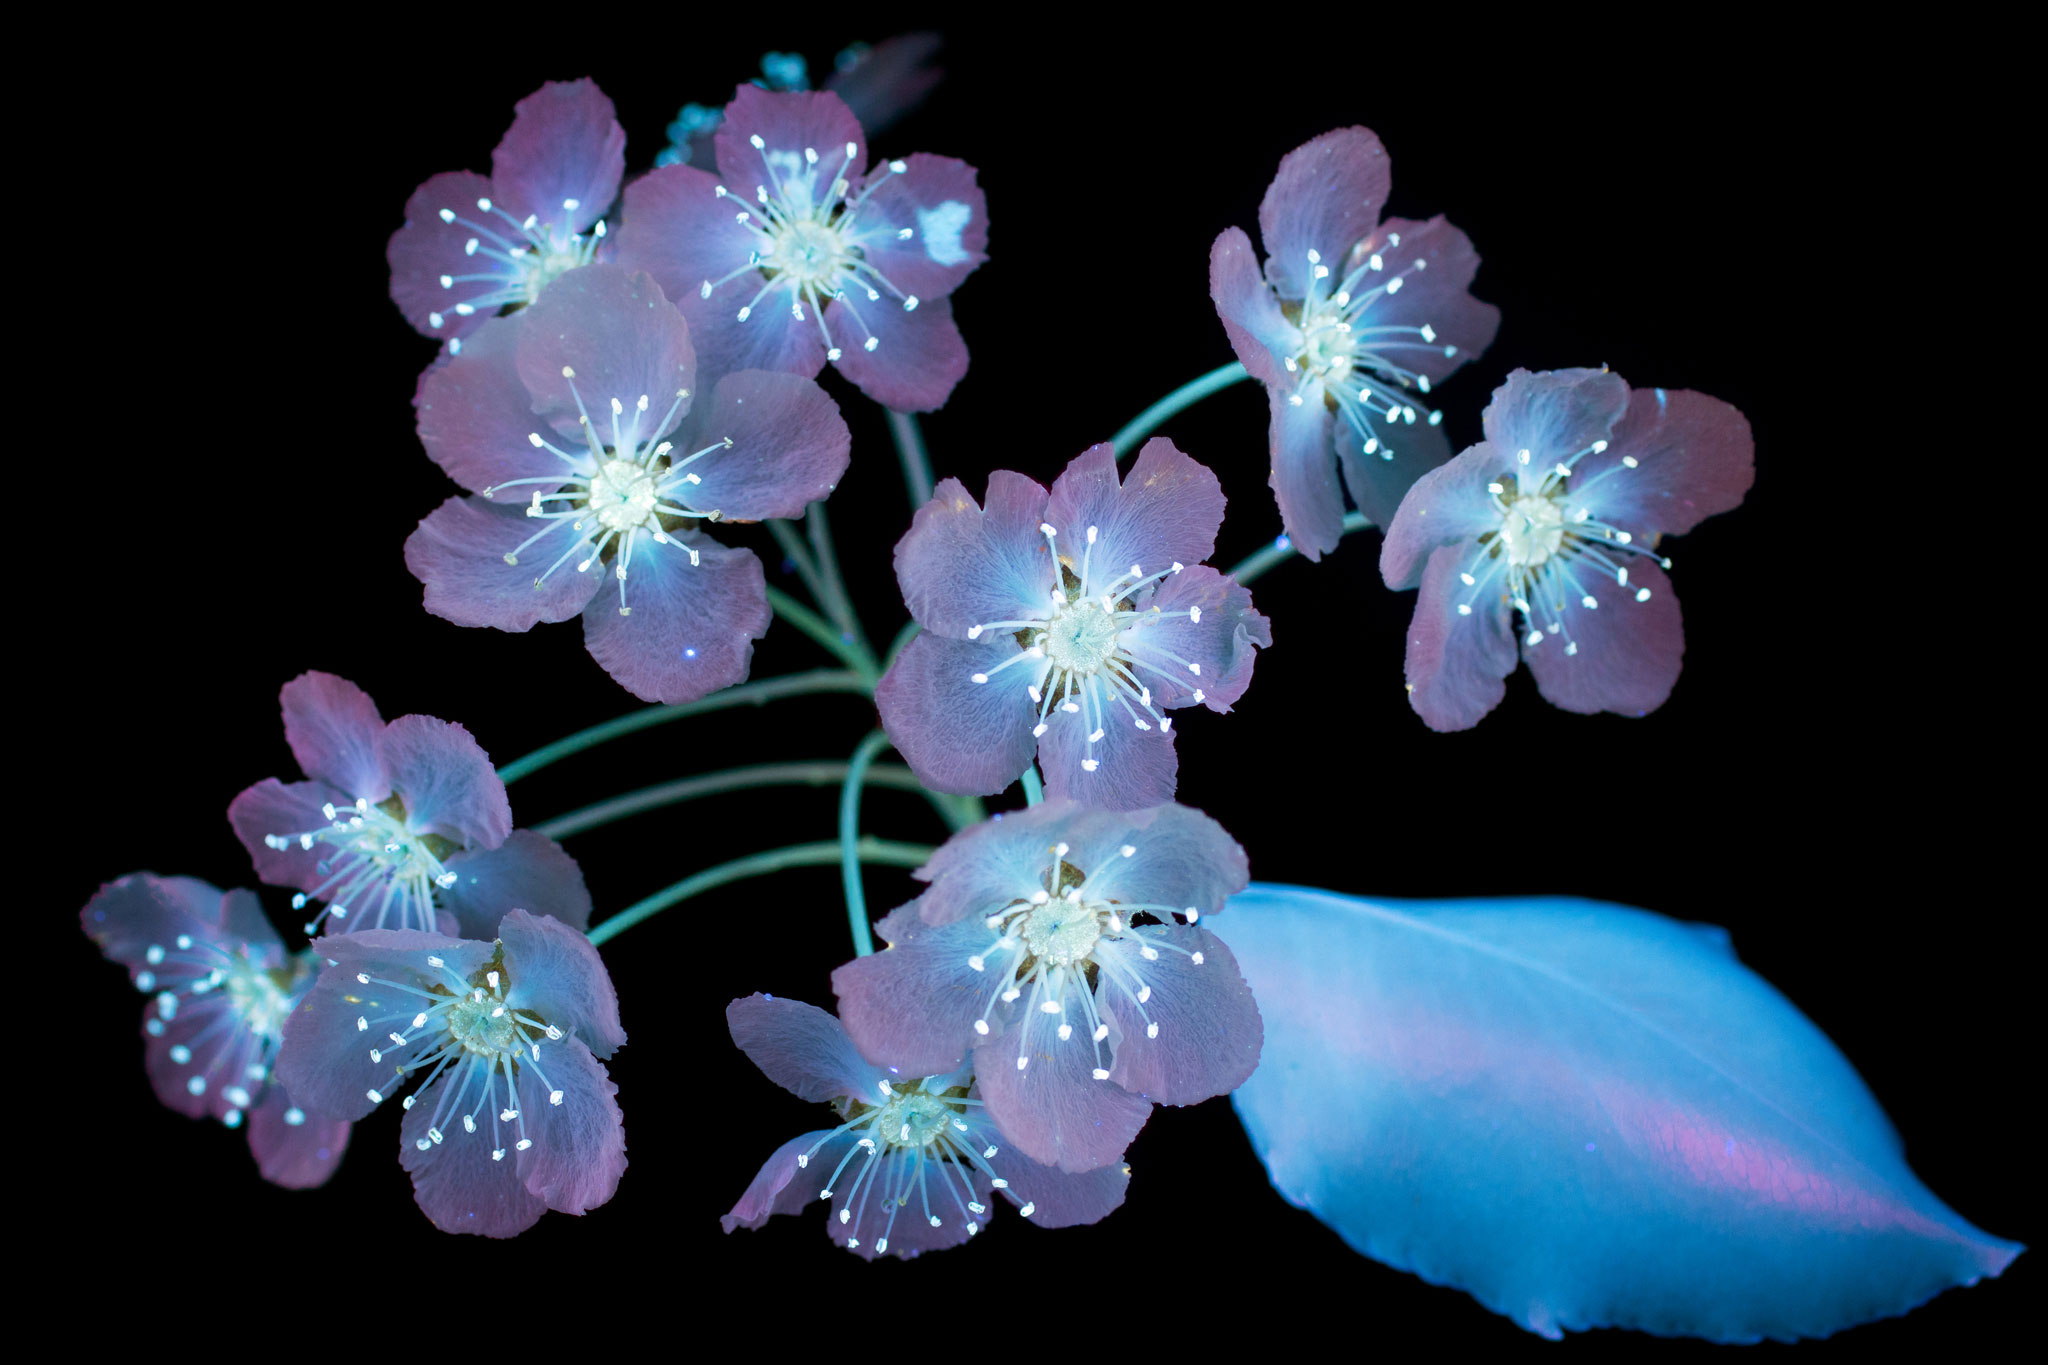 Pictures: Flowers Glow Under UV-Induced Visible Fluorescence